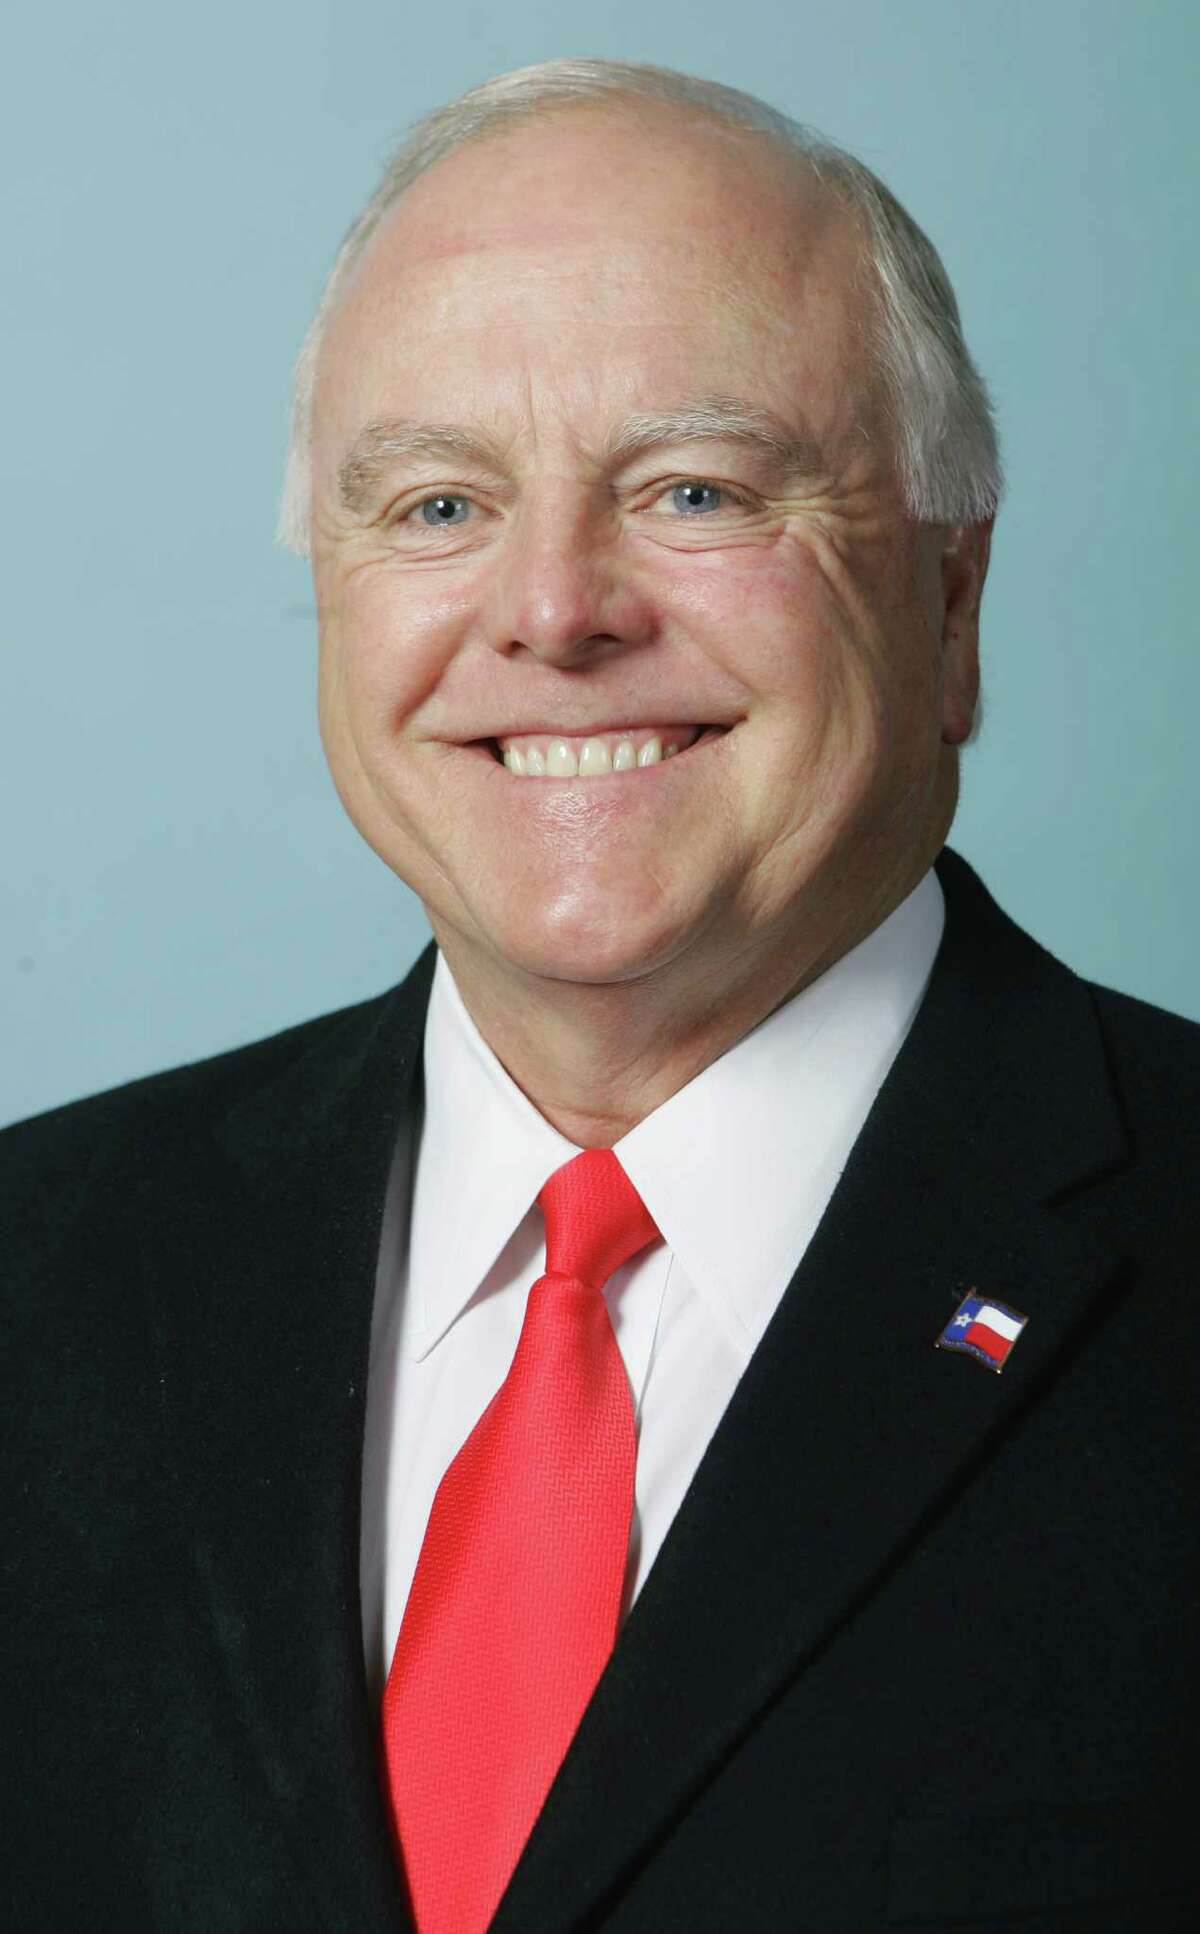 Rep. Sid Miller, R-Stephenville, is shown in Austin, Thursday, Feb. 8, 2007. After a supporter of his Democratic opponent complained in September, 2008, Rep. Miller corrected his disclosure filings to affirm that he has a business partner who is also a lobbyist. Records show that the lobbyist has collected $576,000 from Rep. Miller since 2000. (AP Photo/LM Otero)